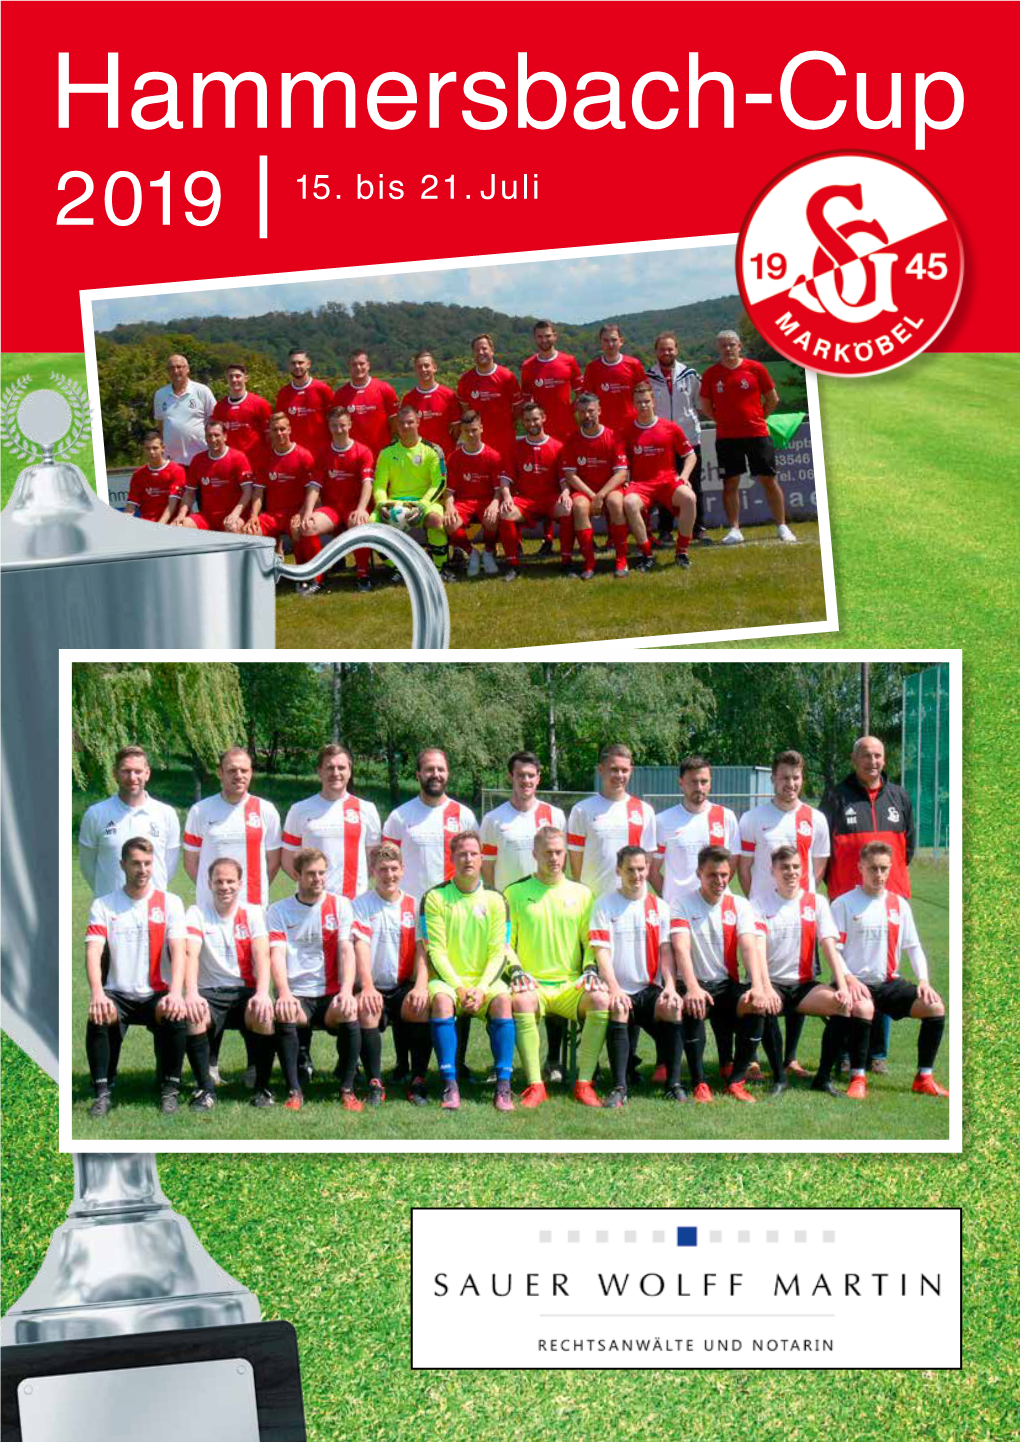 Hammersbach-Cup 2019 I 15